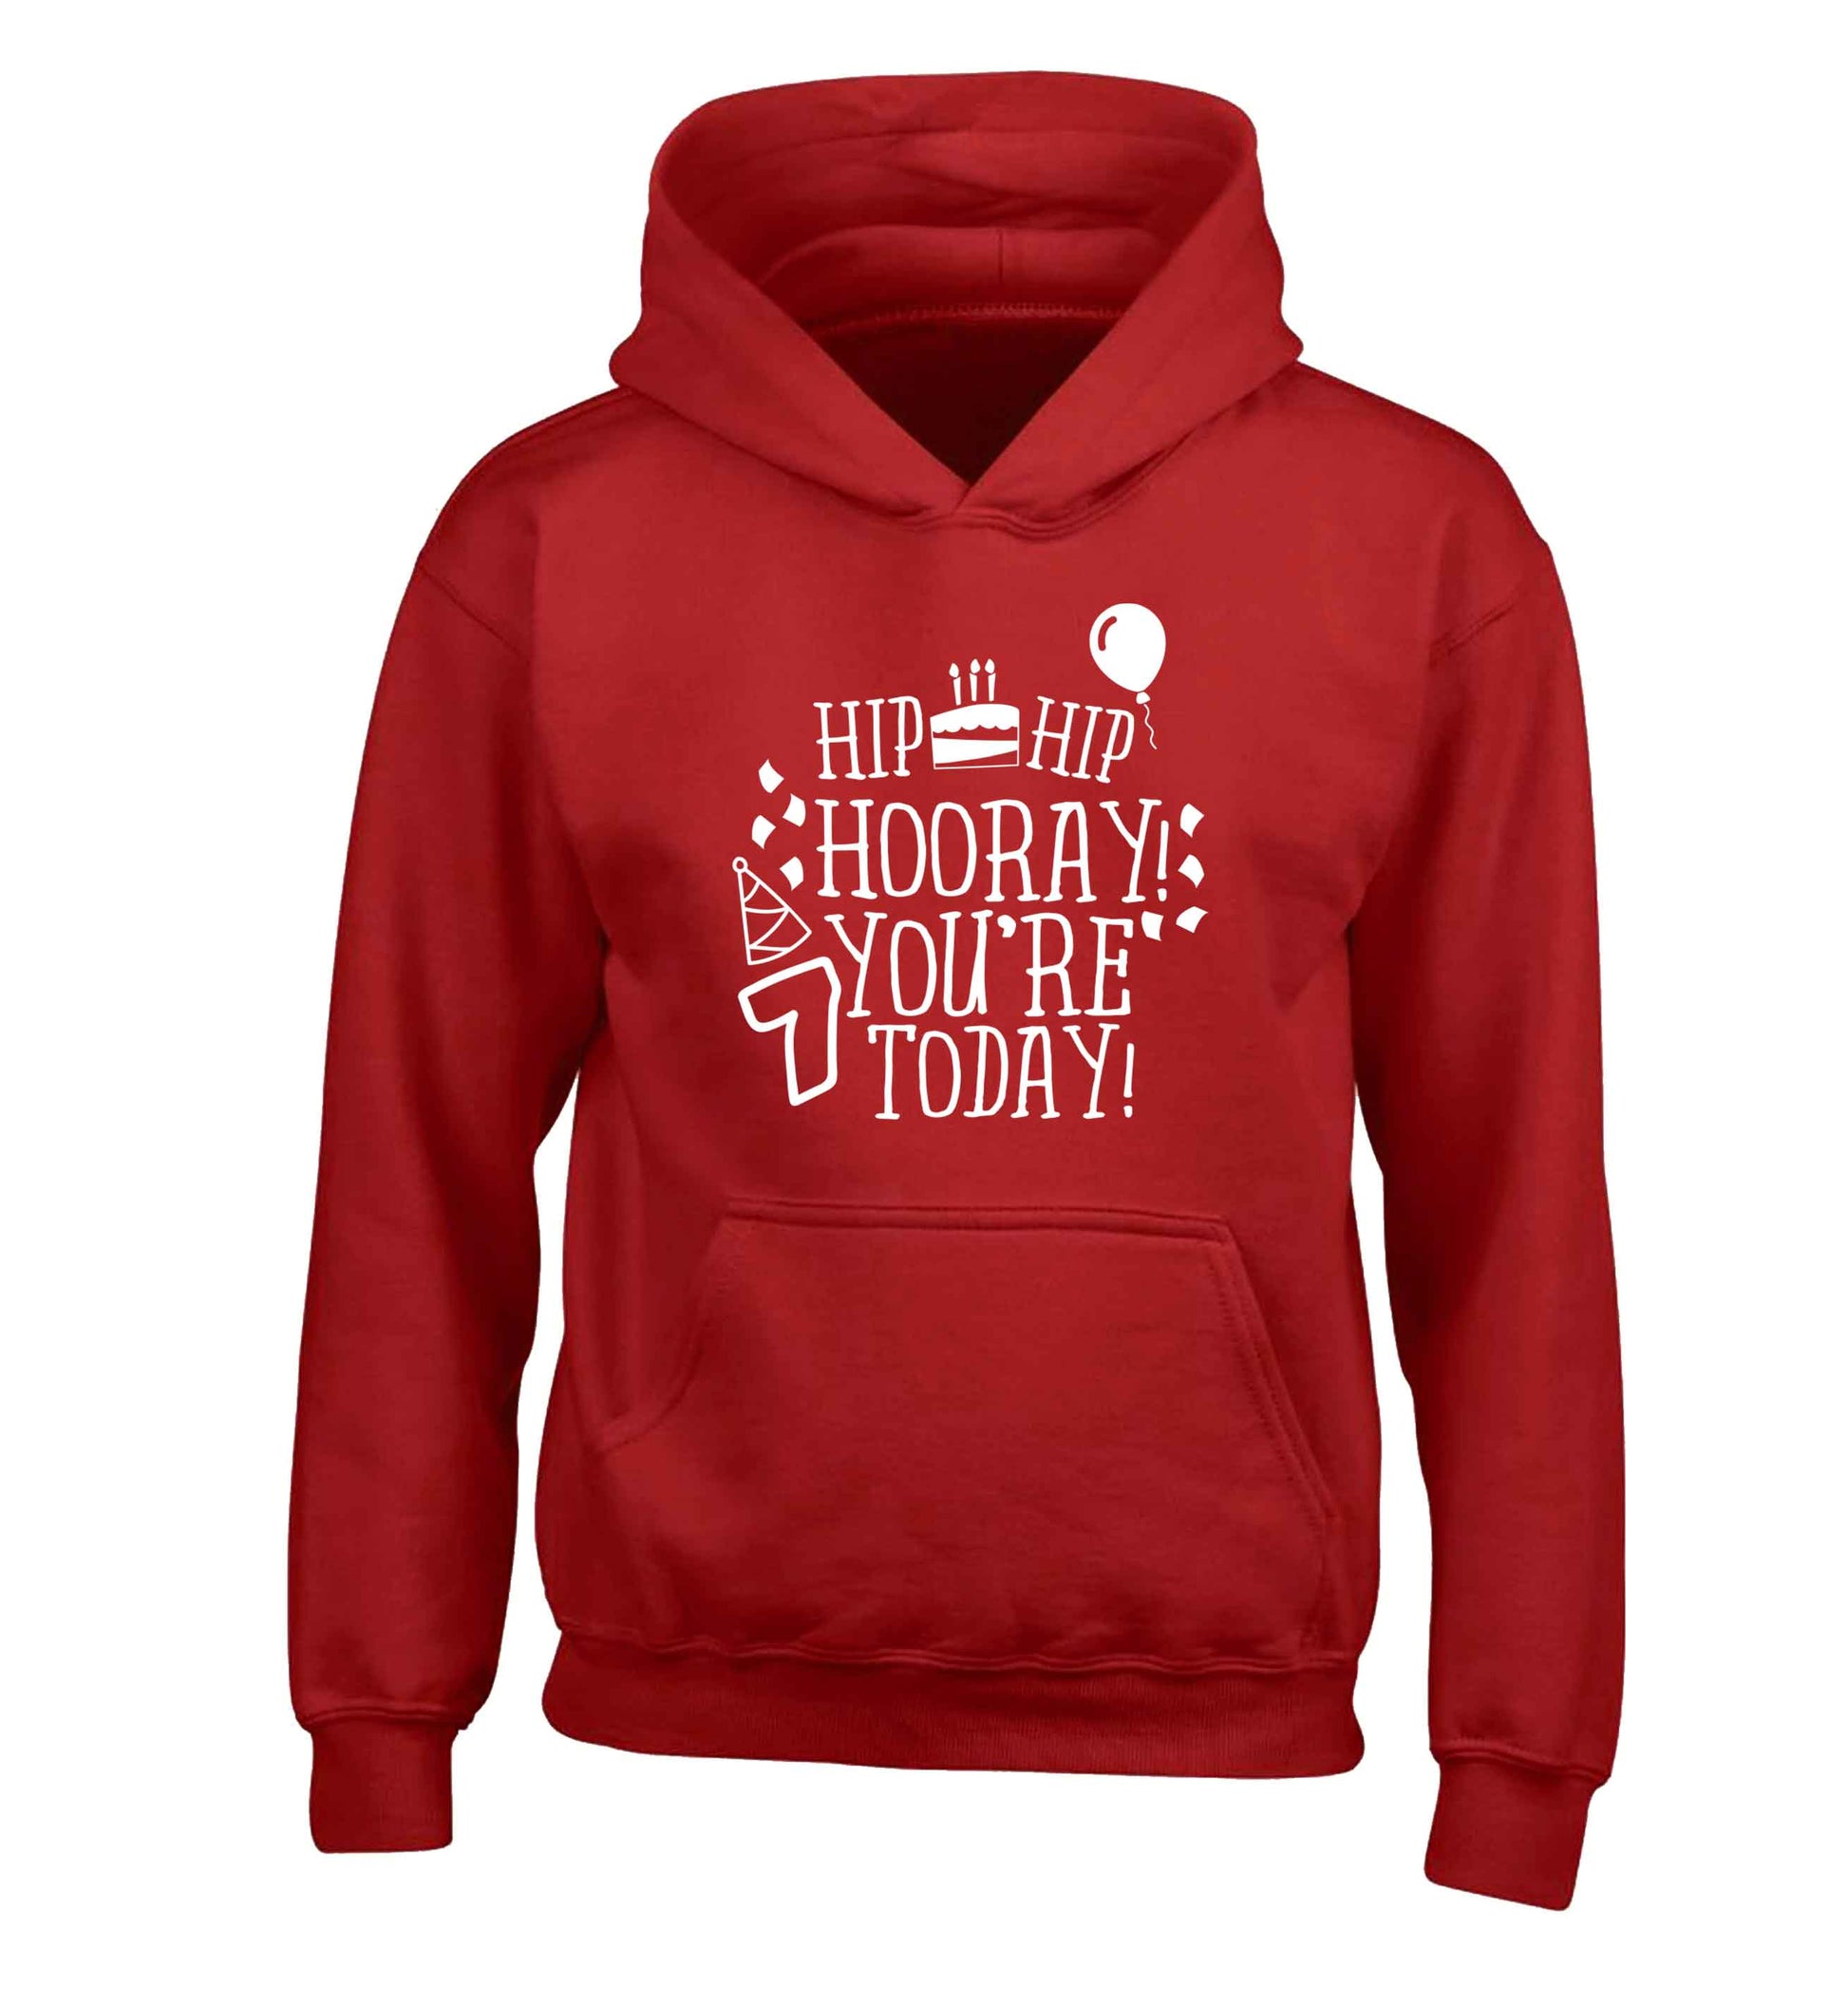 Hip hip hooray you're seven today! children's red hoodie 12-13 Years